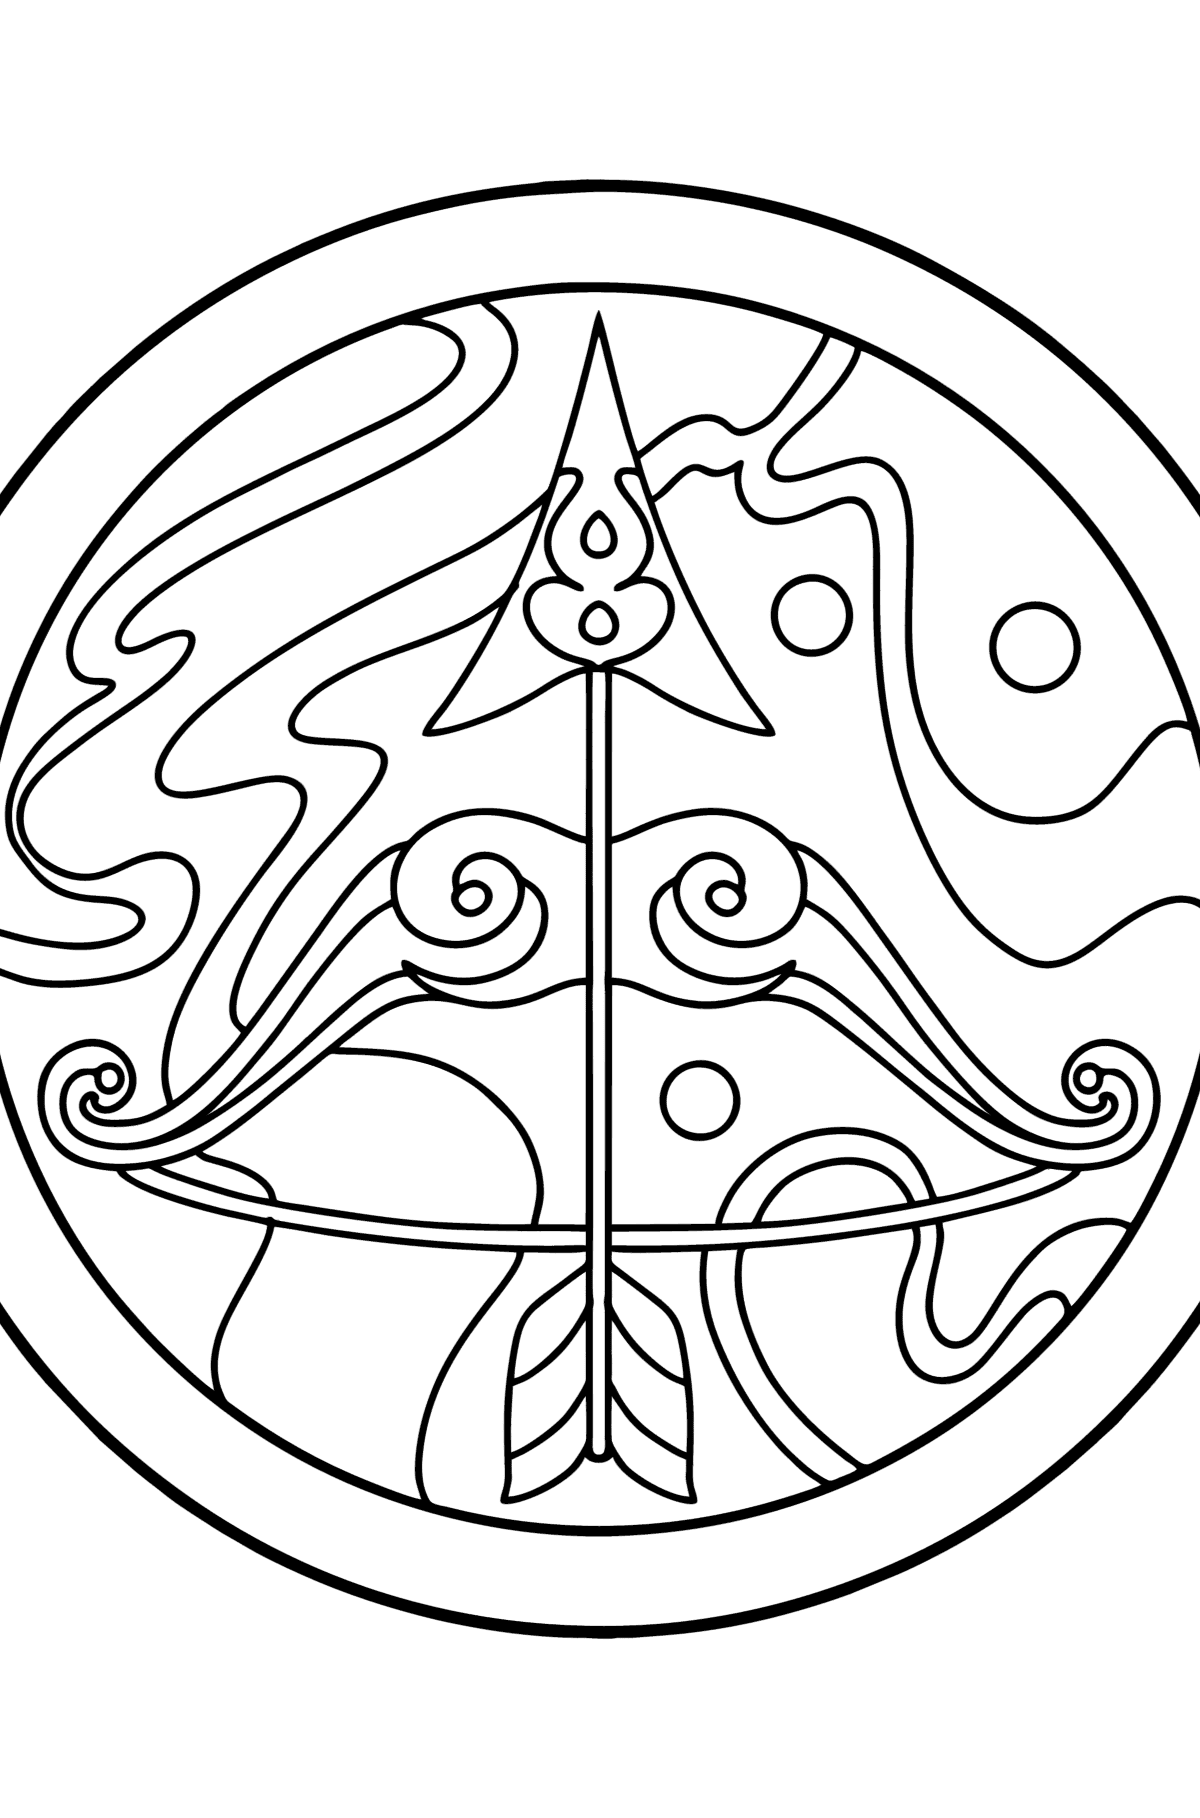 Coloring page for kids - zodiac sign Sagittarius - Coloring Pages for Kids